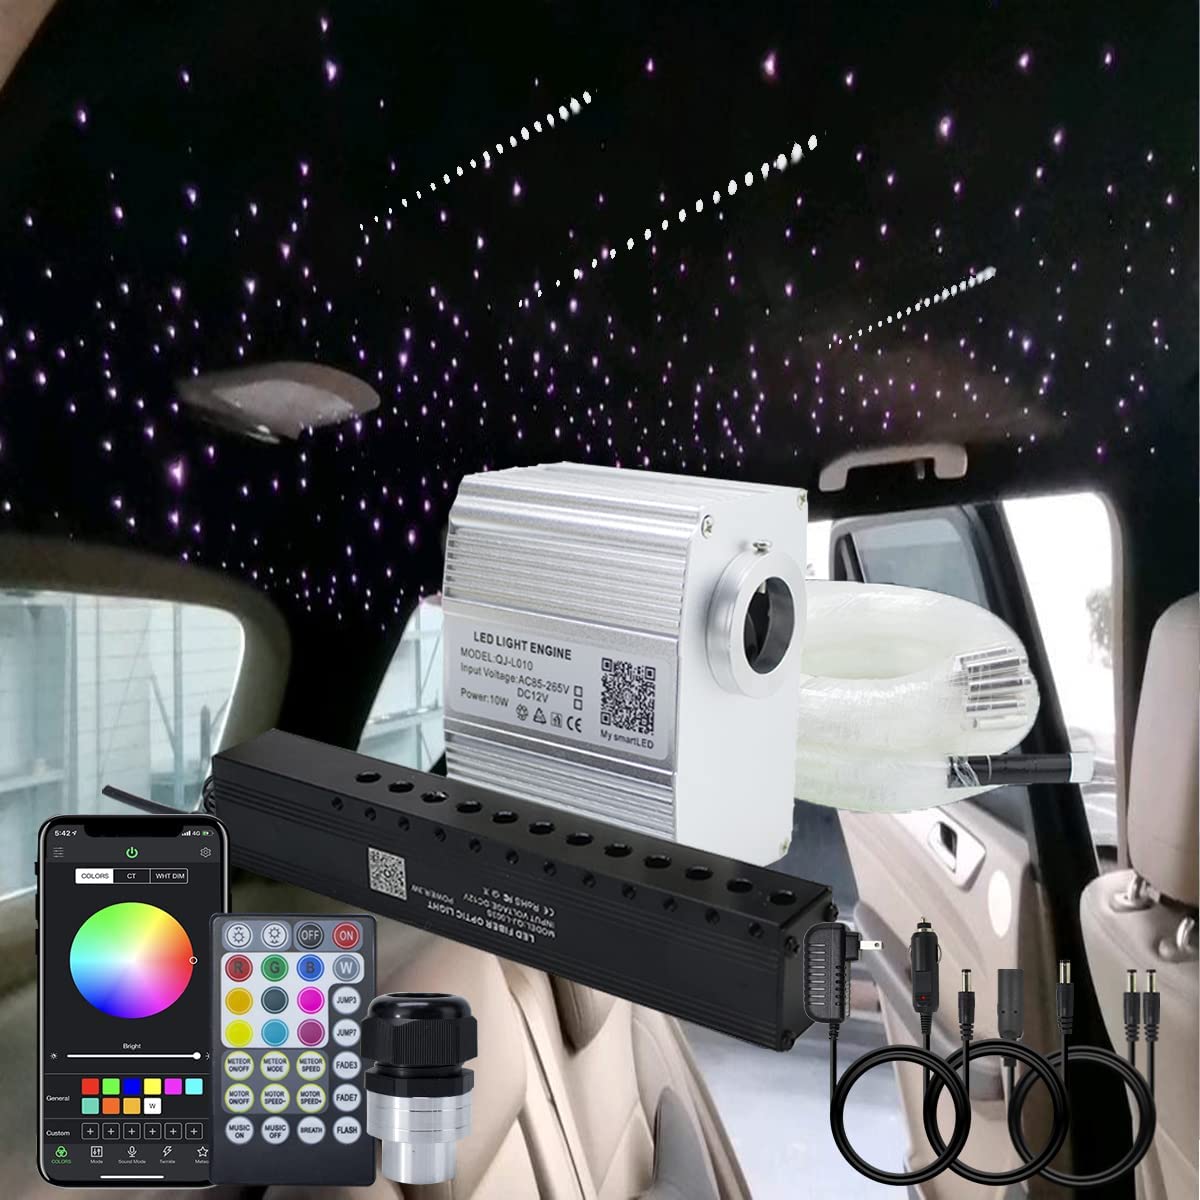 10W Fiber Optic Starlight Headliner Kit with Shooting Star for Car Truck SUV & Home Theater Rooms | STARLIGHTheadliners.shop